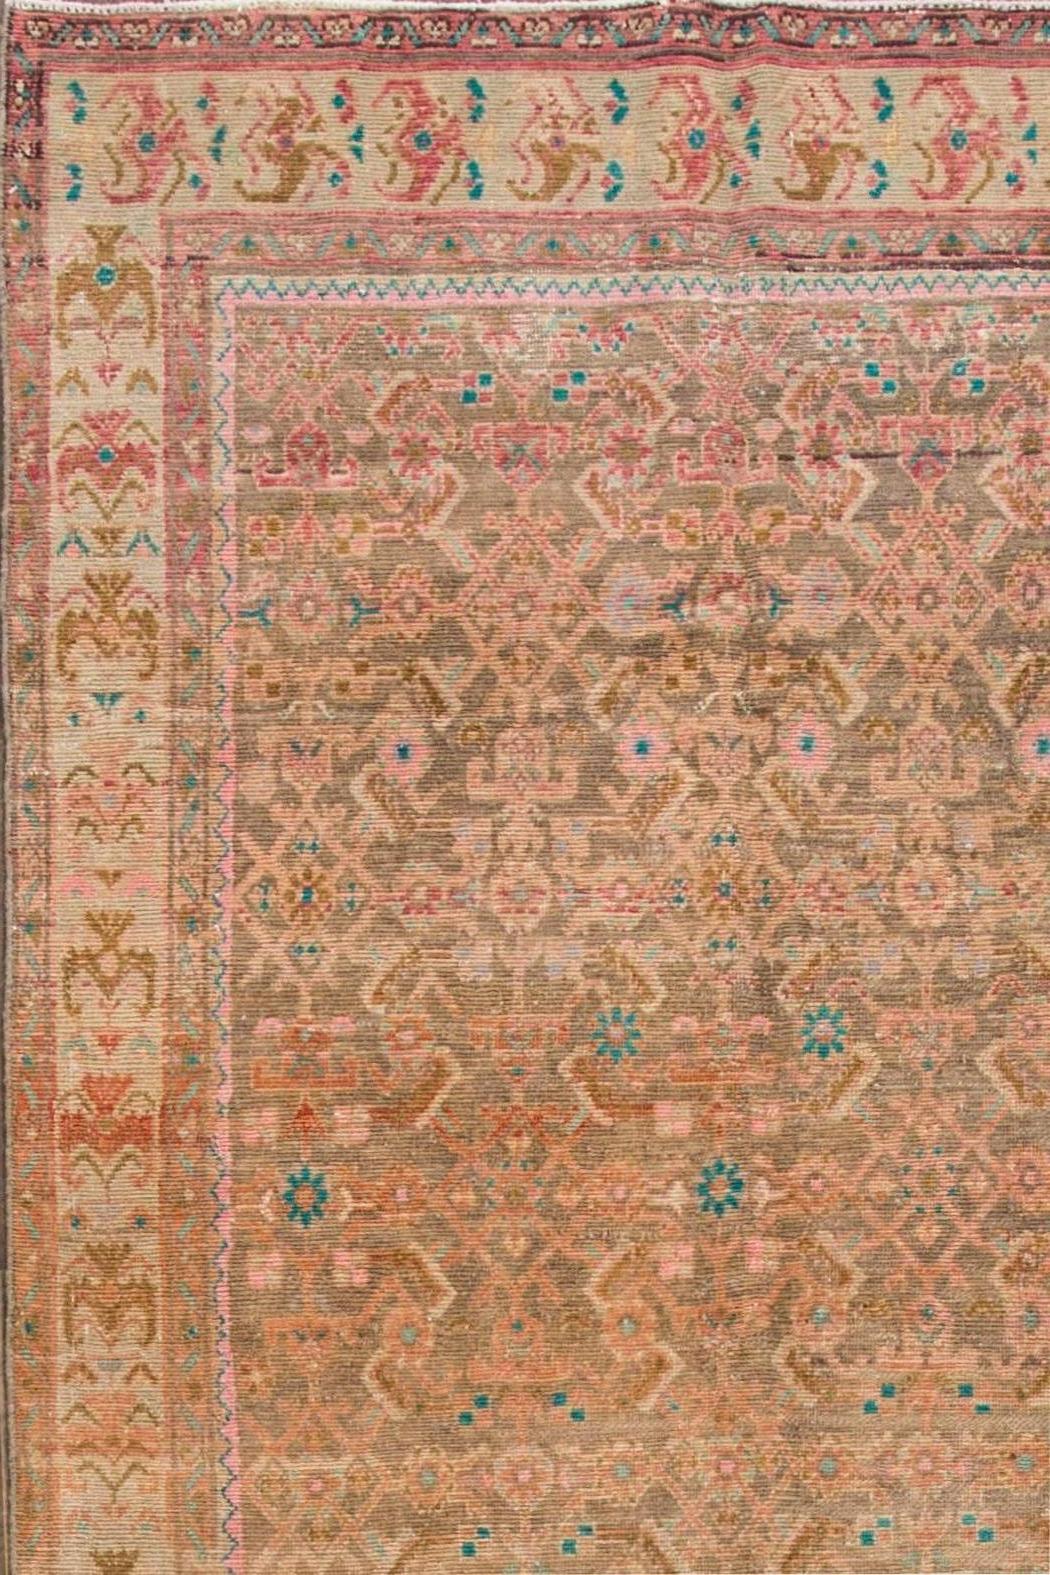 1930s vintage Persian Tabriz carpet. This distressed piece features a beige field and traditional, all-over design in peach tones, accented with blue. Measures: 4.08 x 12.06.